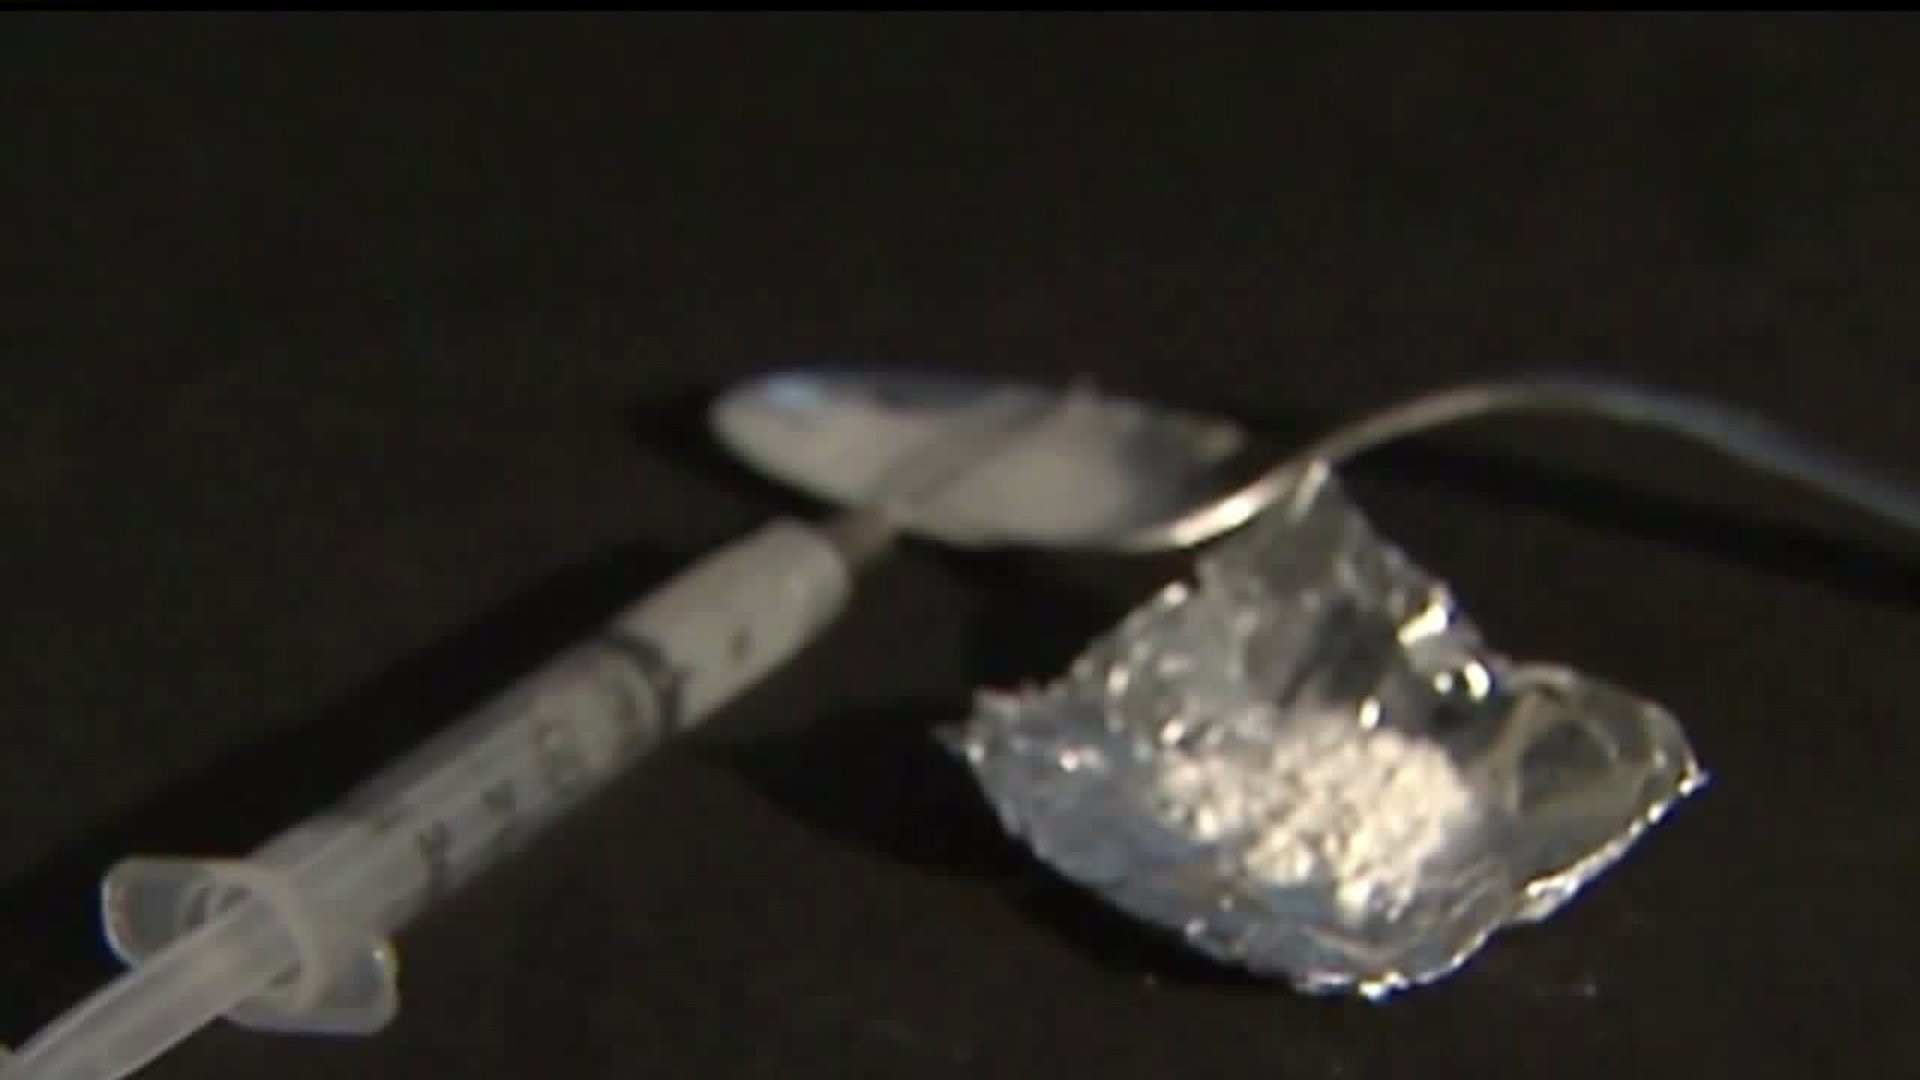 November "largest spike ever" of heroin-related overdose deaths in York County